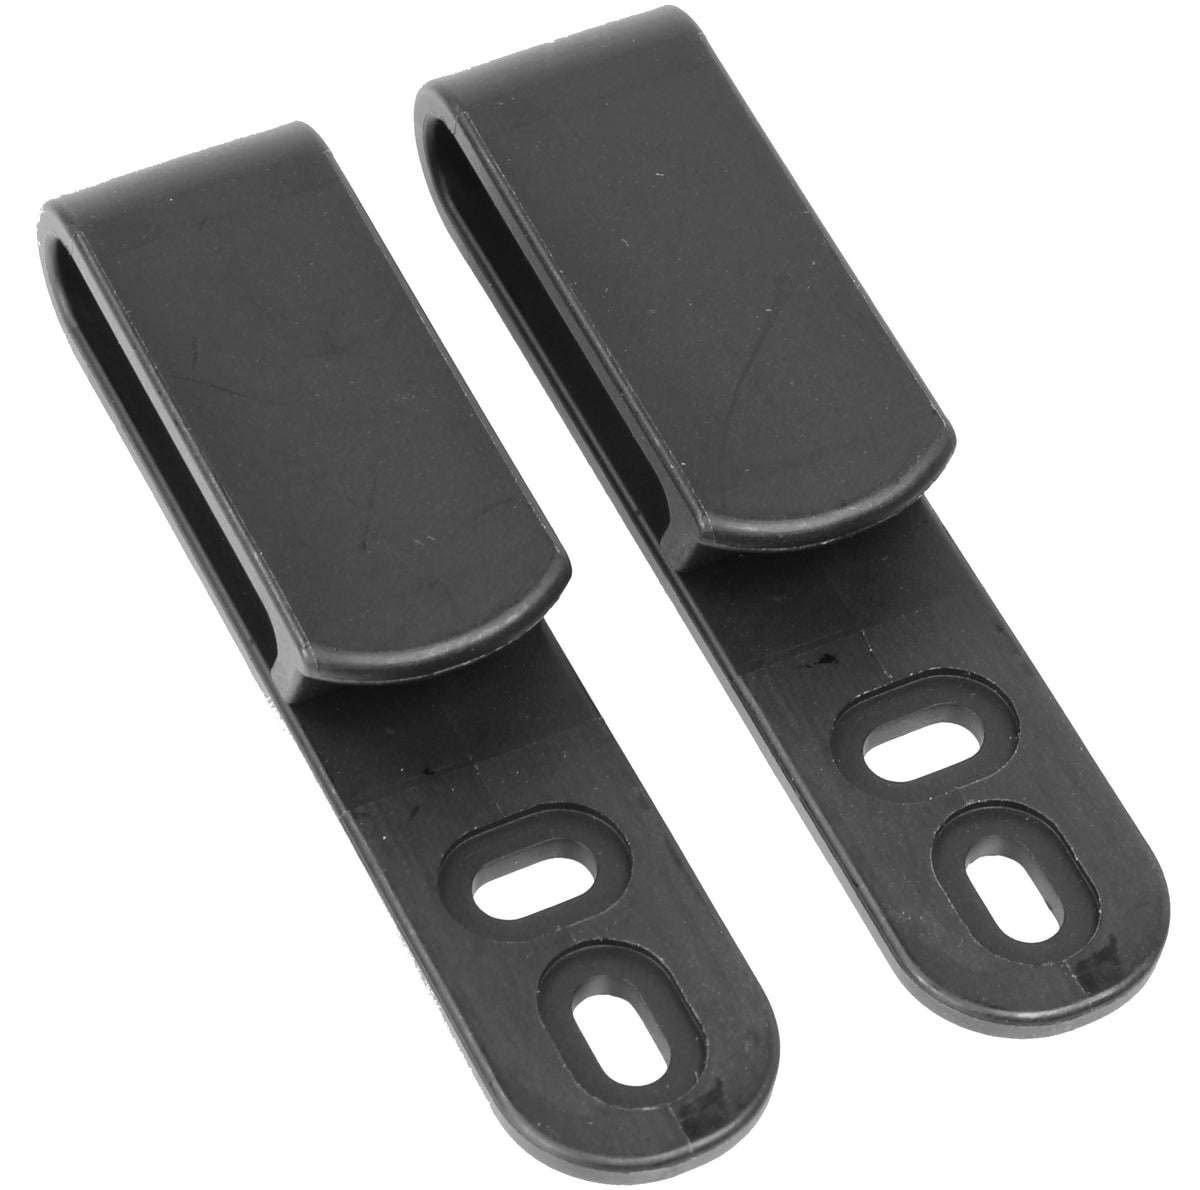 Tough Holster Clips, Adjustable Cant for IWB OWB Kydex, Leather